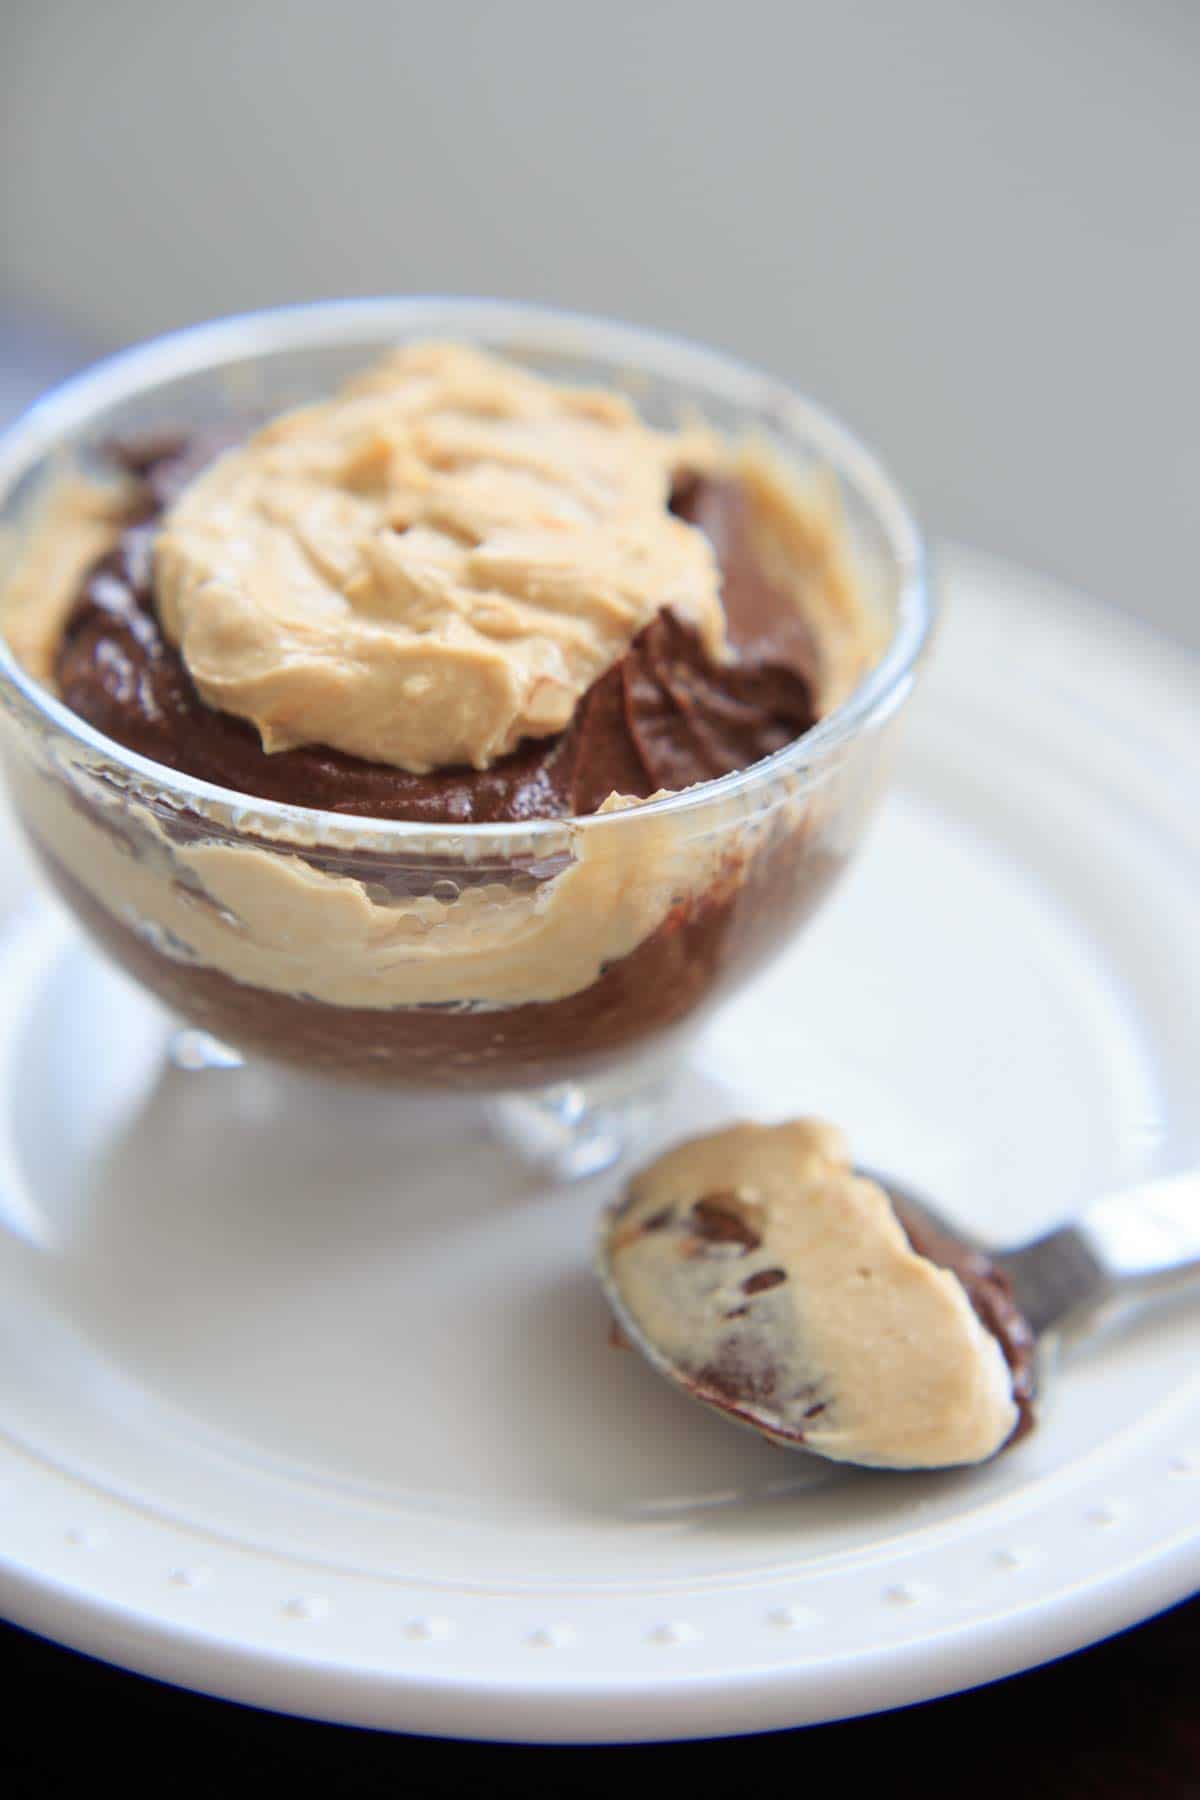 Vegan Chocolate Peanut Butter Mousse in dessert bowl, with spoonful resting next to it on white plate